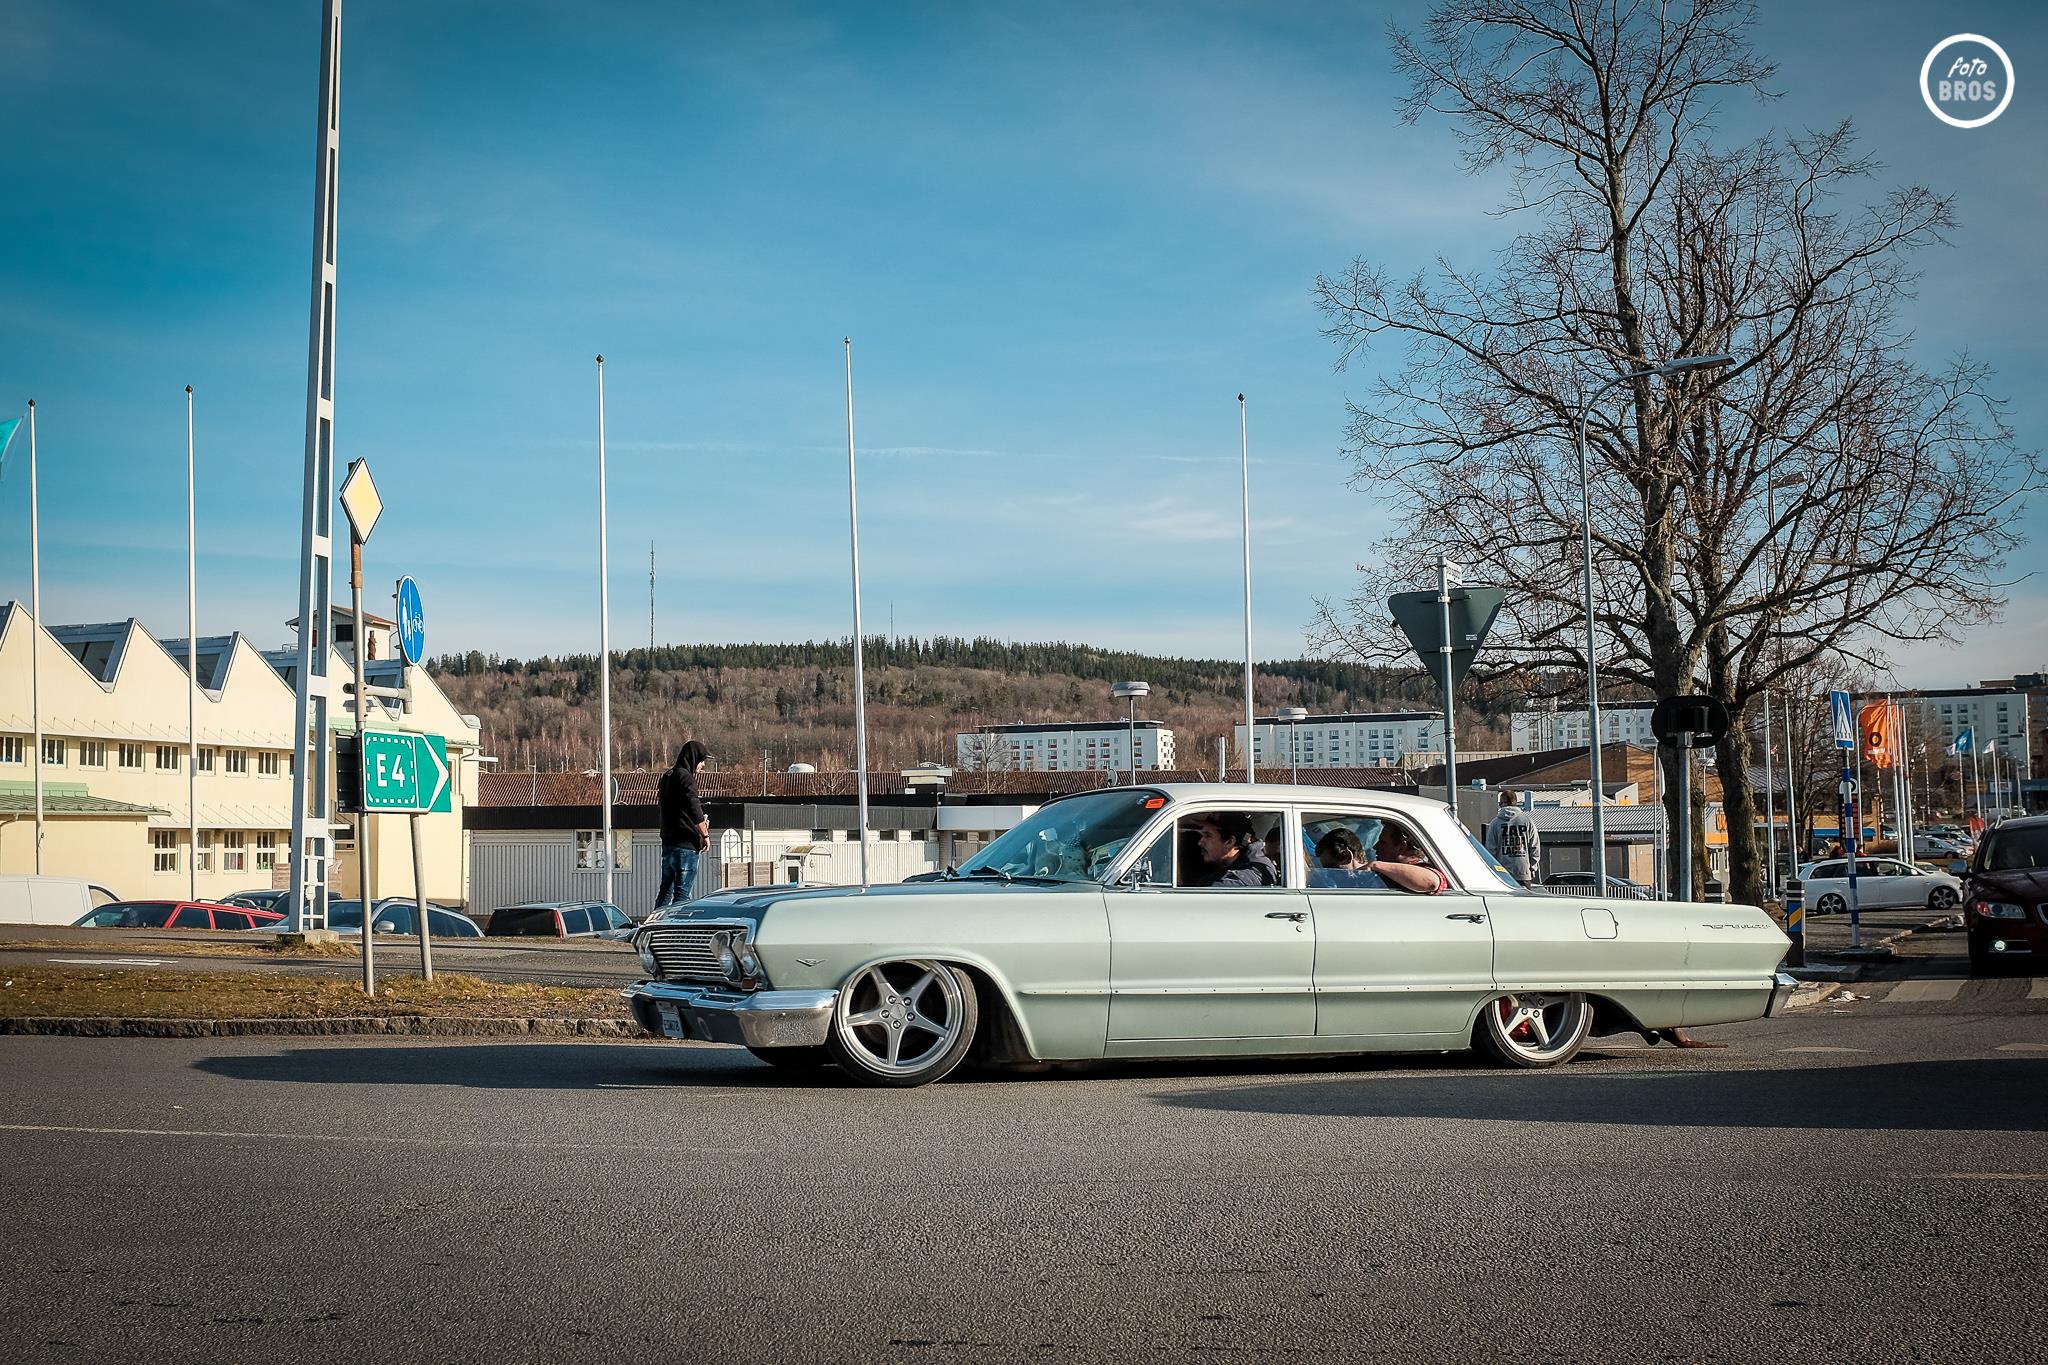 General 2048x1365 car Sweden vehicle stanced classic car